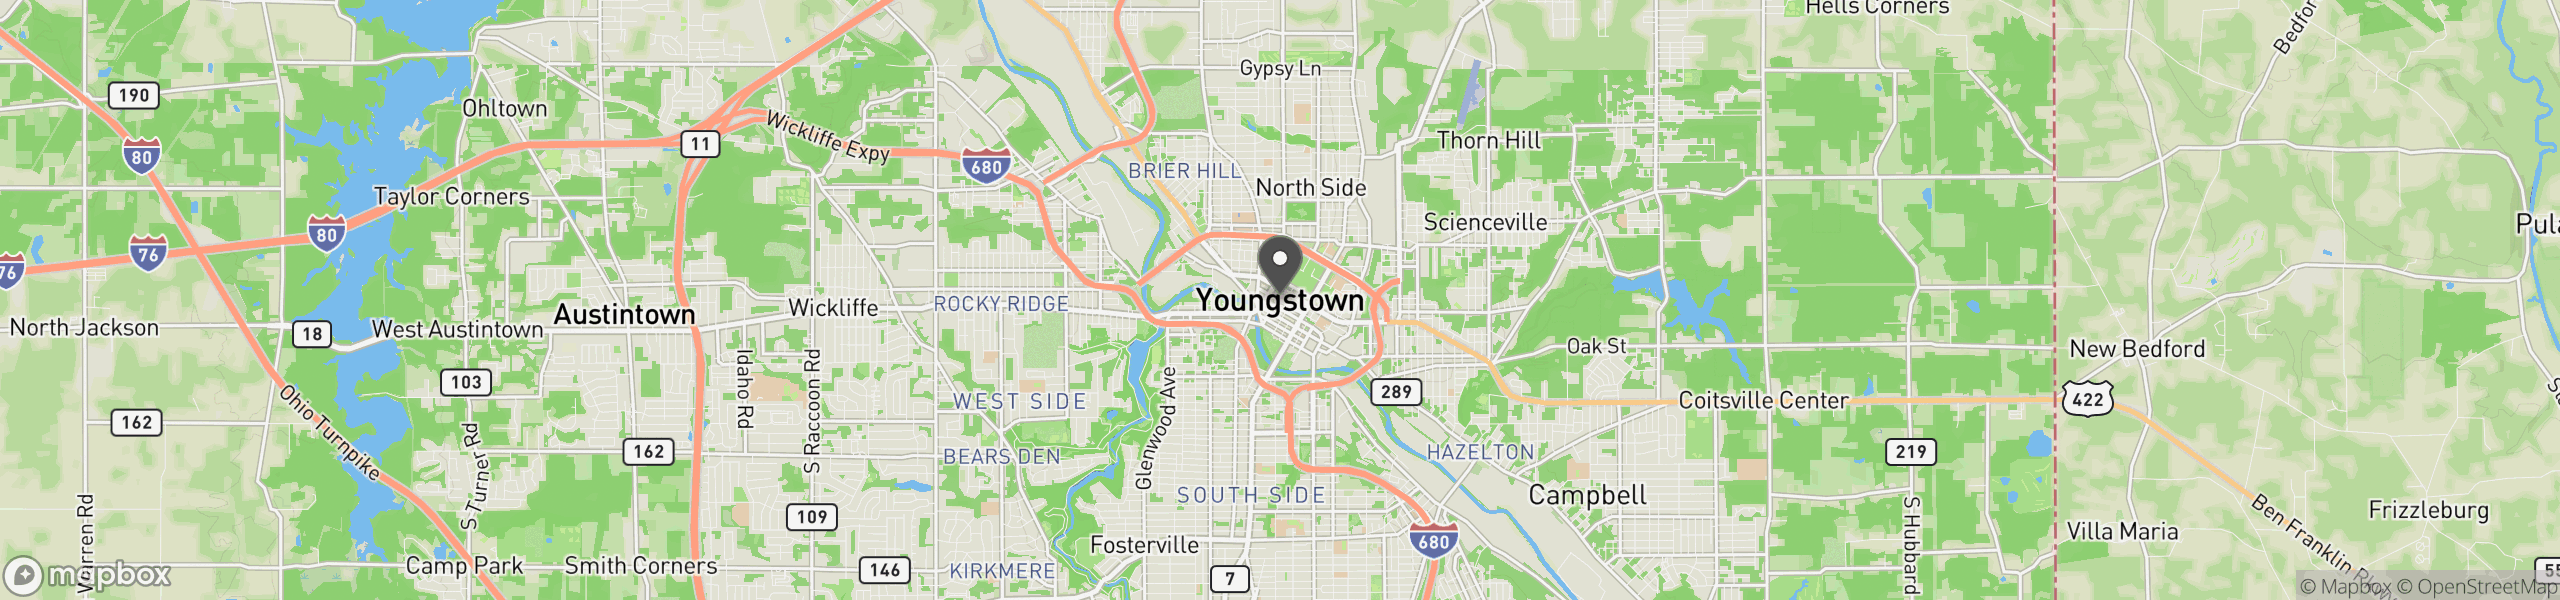 Youngstown, OH 44501